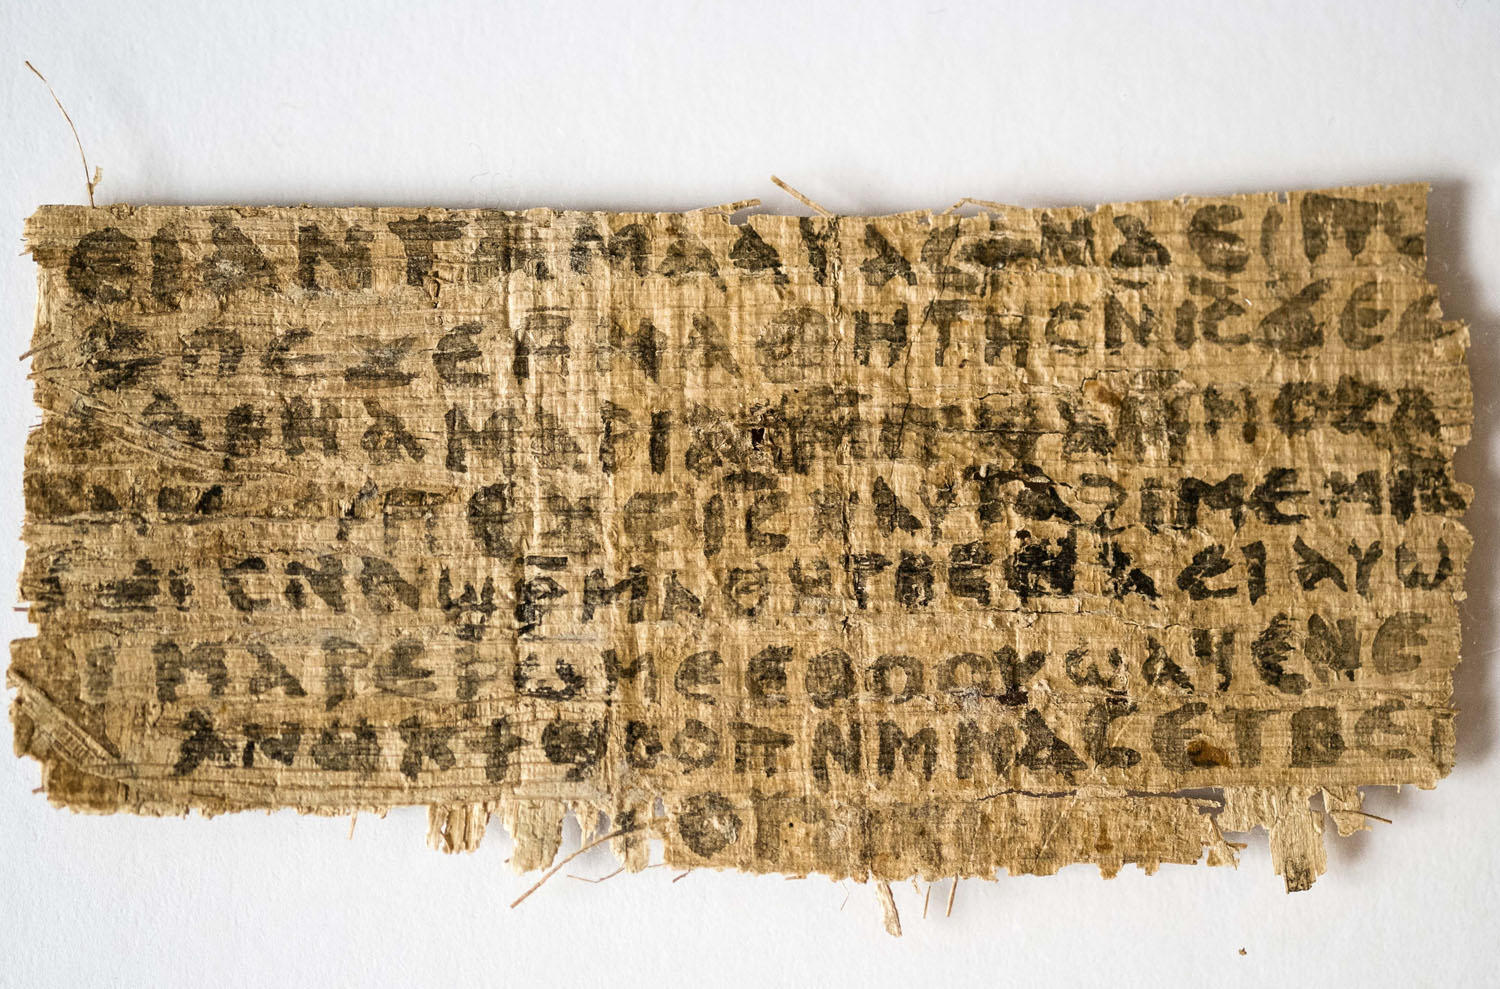 This Sept. 5, 2012 photo released by Harvard University shows a fourth century fragment of papyrus that divinity professor Karen L. King says is the only existing ancient text that quotes Jesus explicitly referring to having a wife. (Karen L. King—Harvard University/AP)